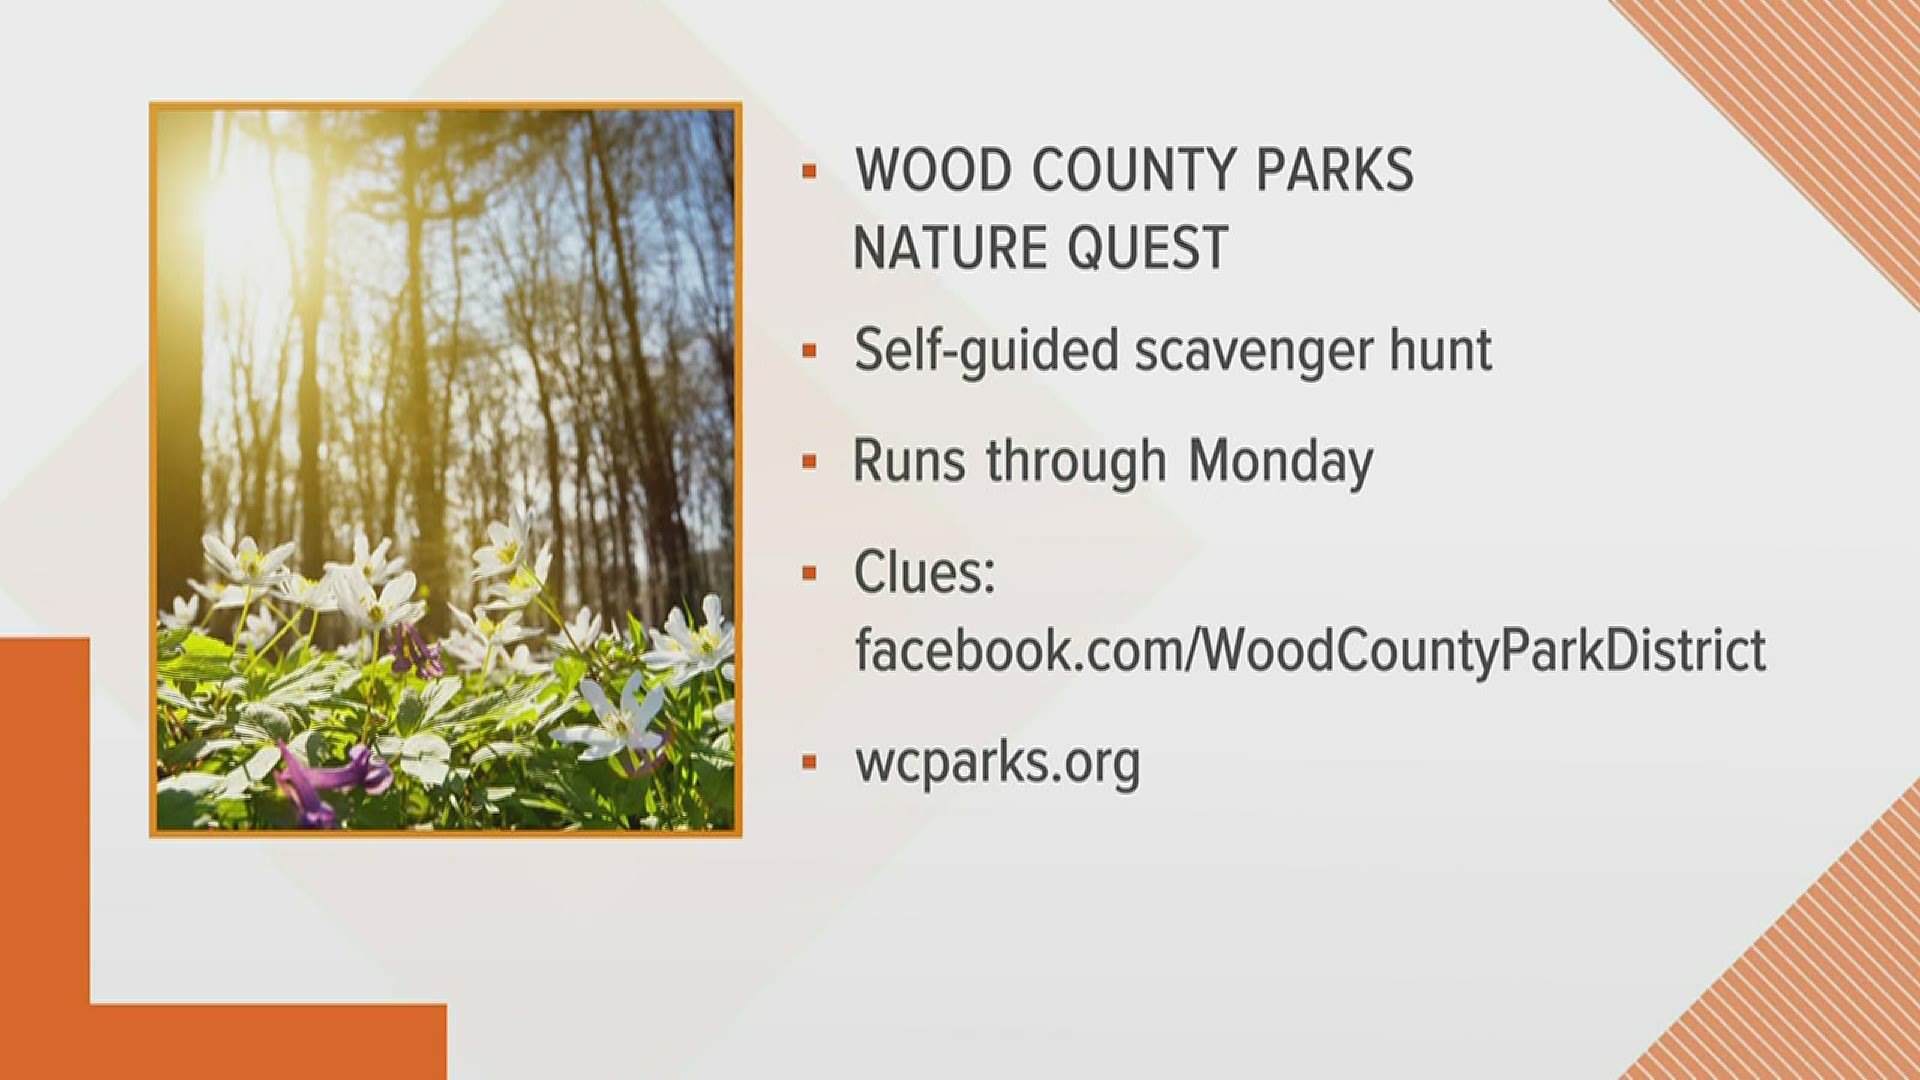 Enjoy the upcoming nice weather with Nature Quest, a self-guided scavenger hunt with the Wood County Park District!